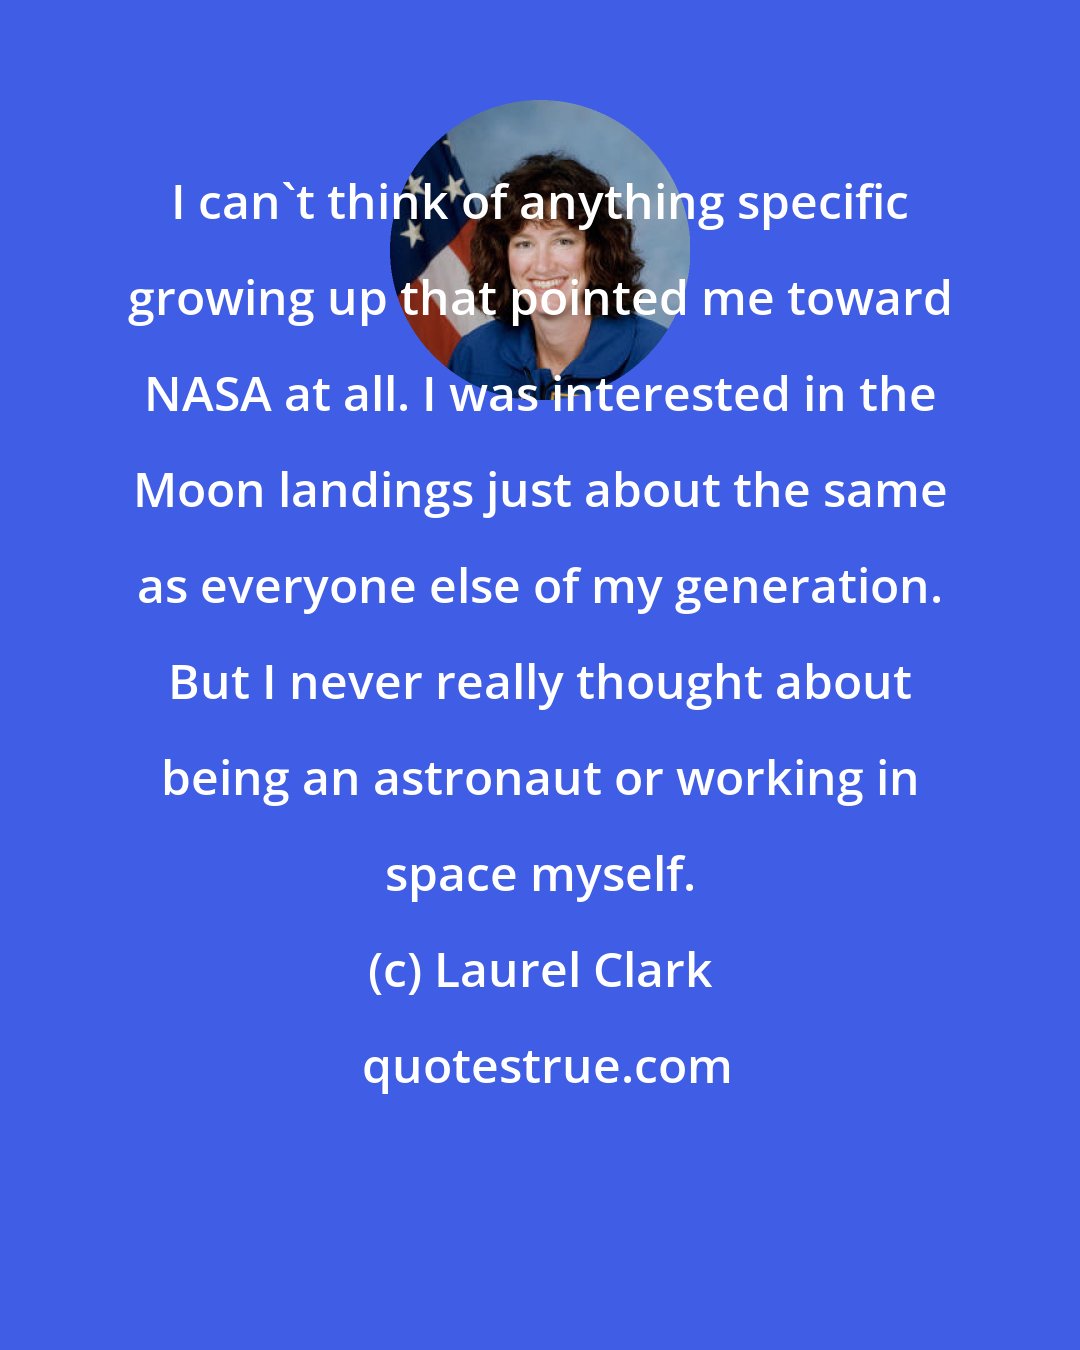 Laurel Clark: I can't think of anything specific growing up that pointed me toward NASA at all. I was interested in the Moon landings just about the same as everyone else of my generation. But I never really thought about being an astronaut or working in space myself.